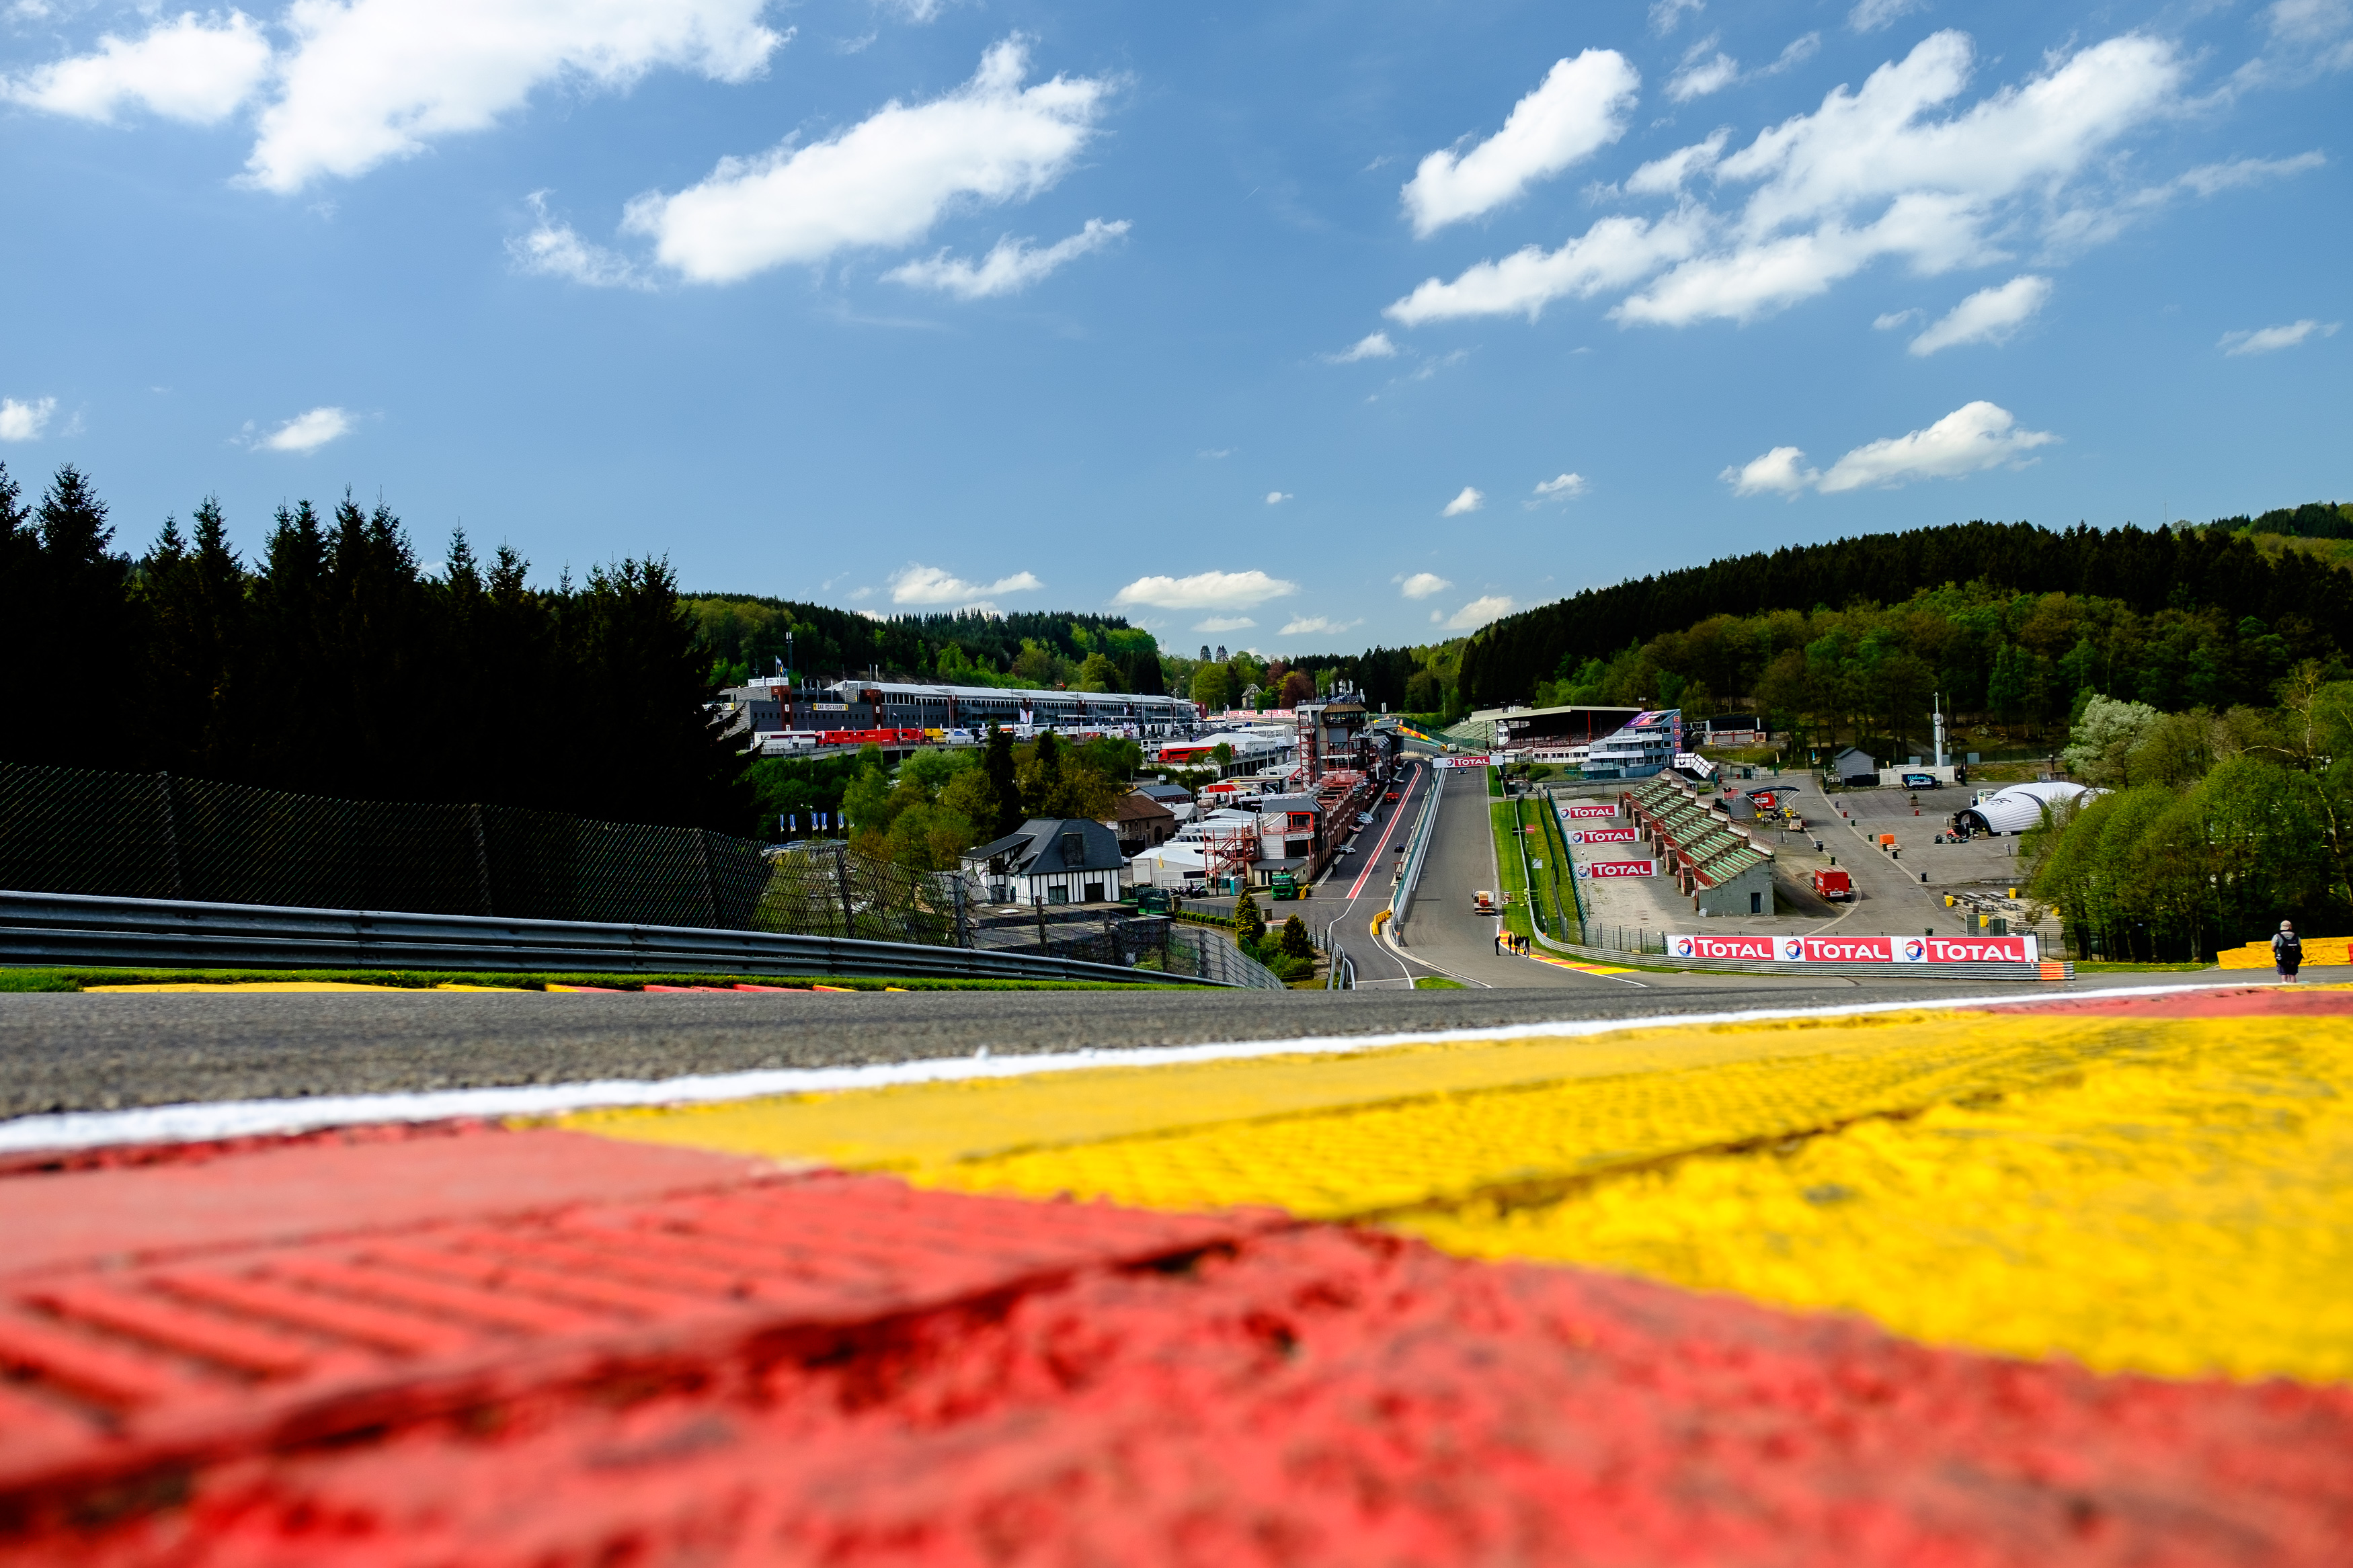 What Makes Spa So Special Fia World Endurance Championship